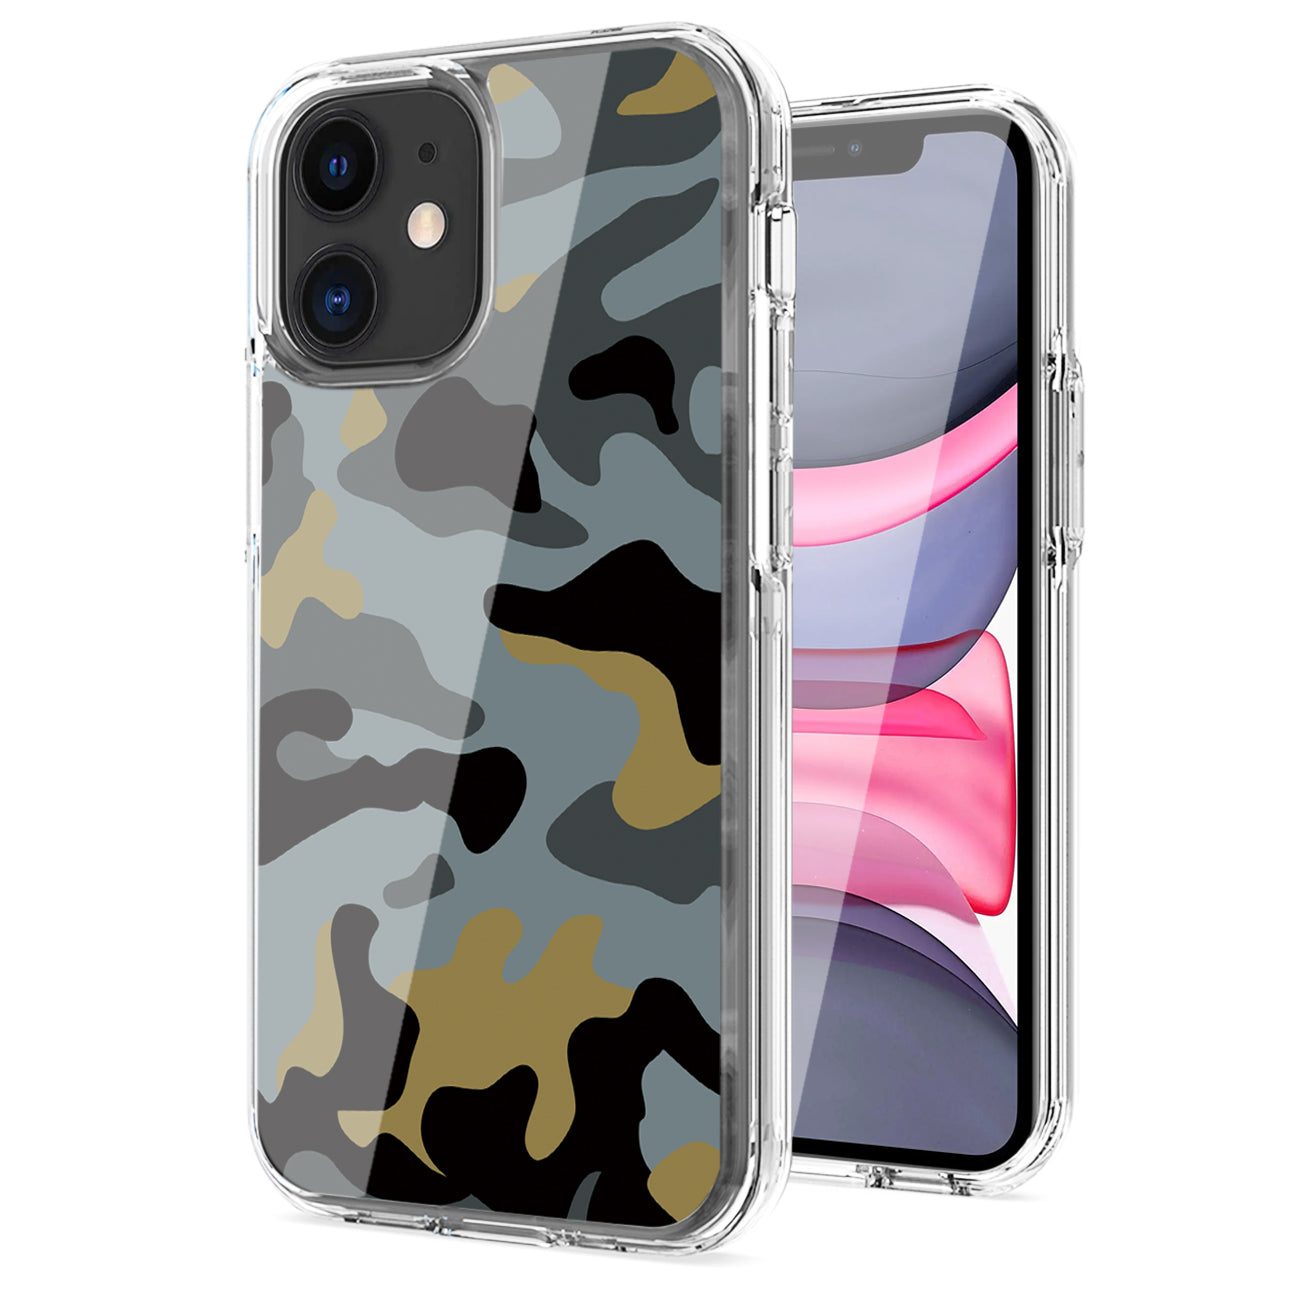 Camouflage Dual Layer Hybrid Hard Plastic and Soft TPU Rubber Case Cover for APPLE IPHONE 11 In Blue